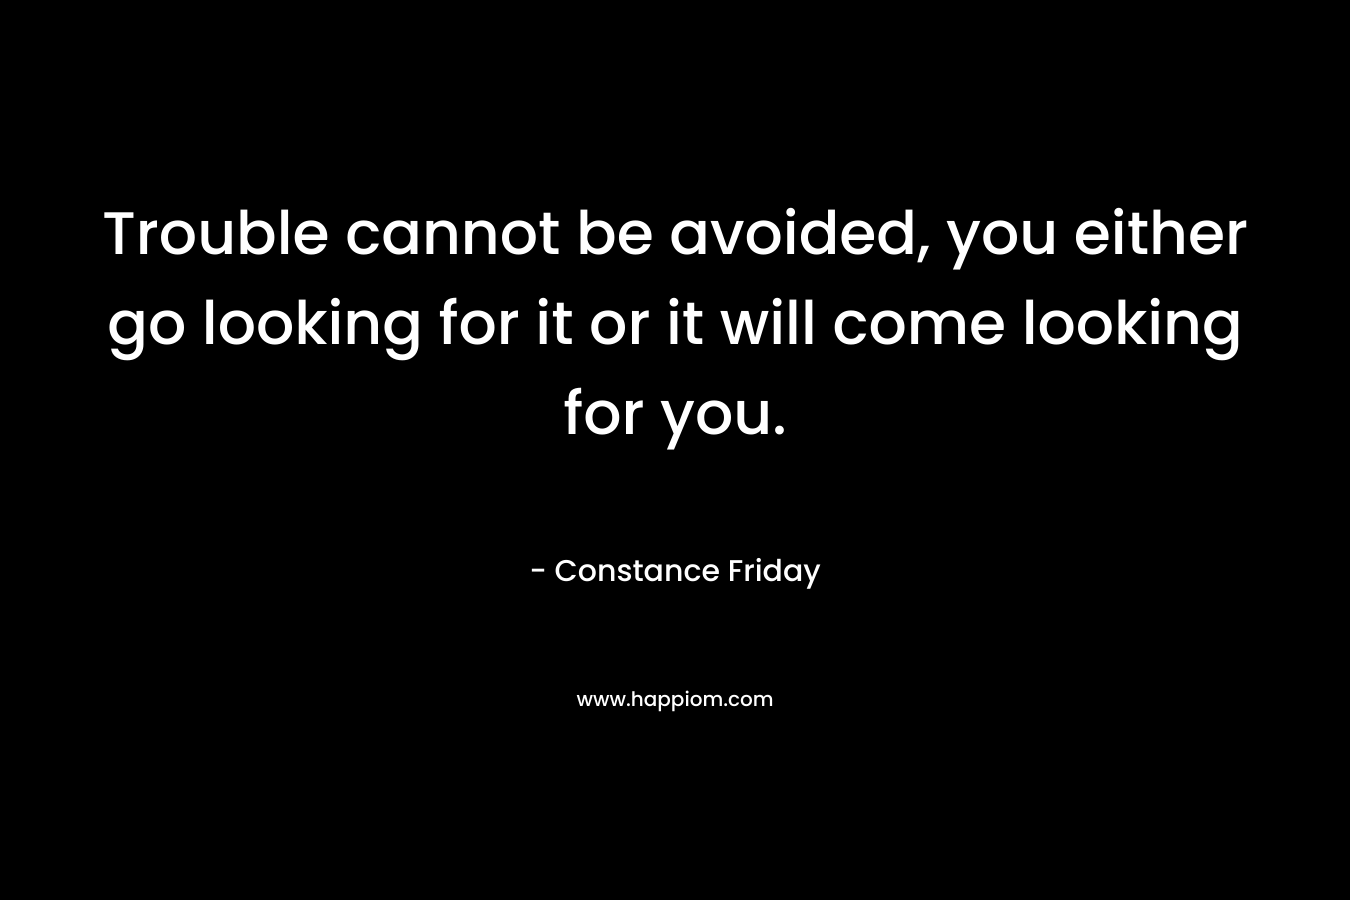 Trouble cannot be avoided, you either go looking for it or it will come looking for you.